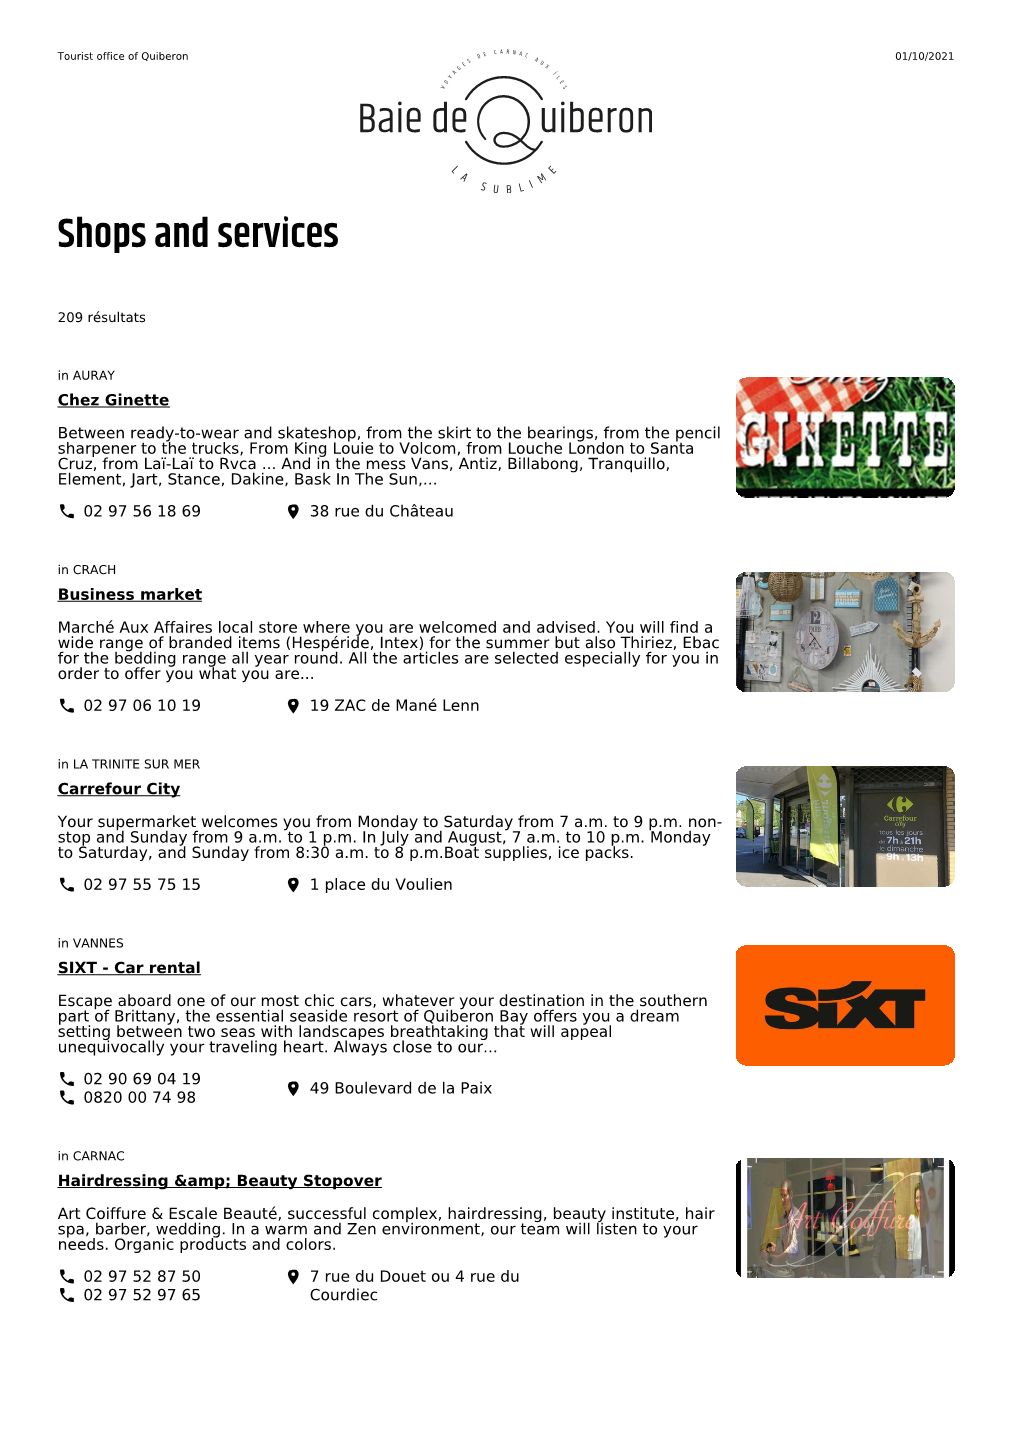 Shops and Services